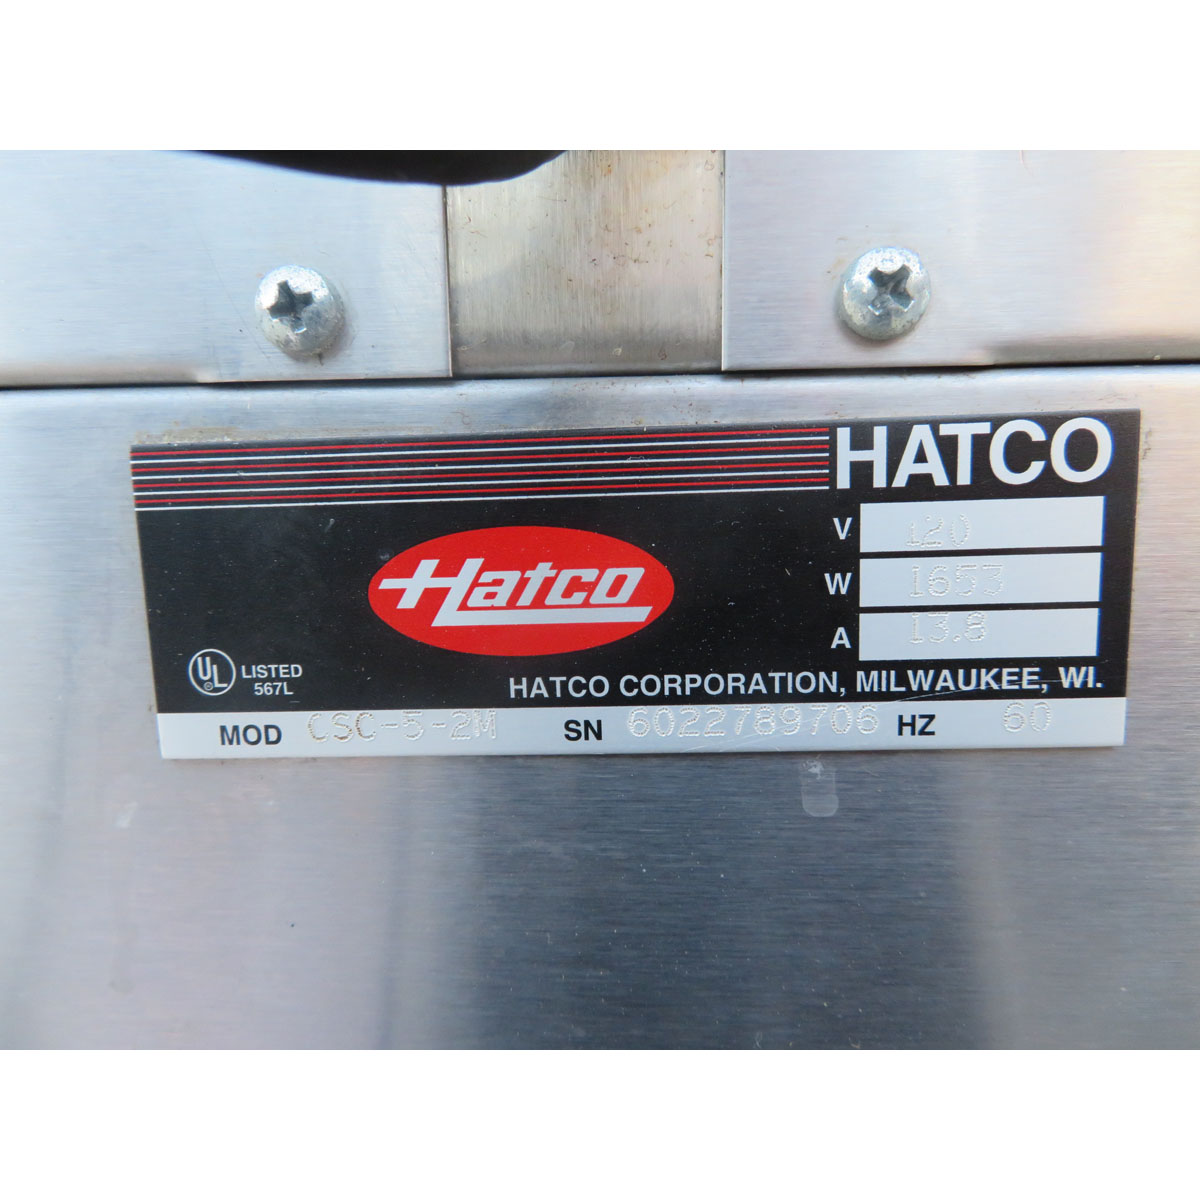 Hatco CSC-5-2M Cook & Hold Oven, Used Very Good Condition image 5